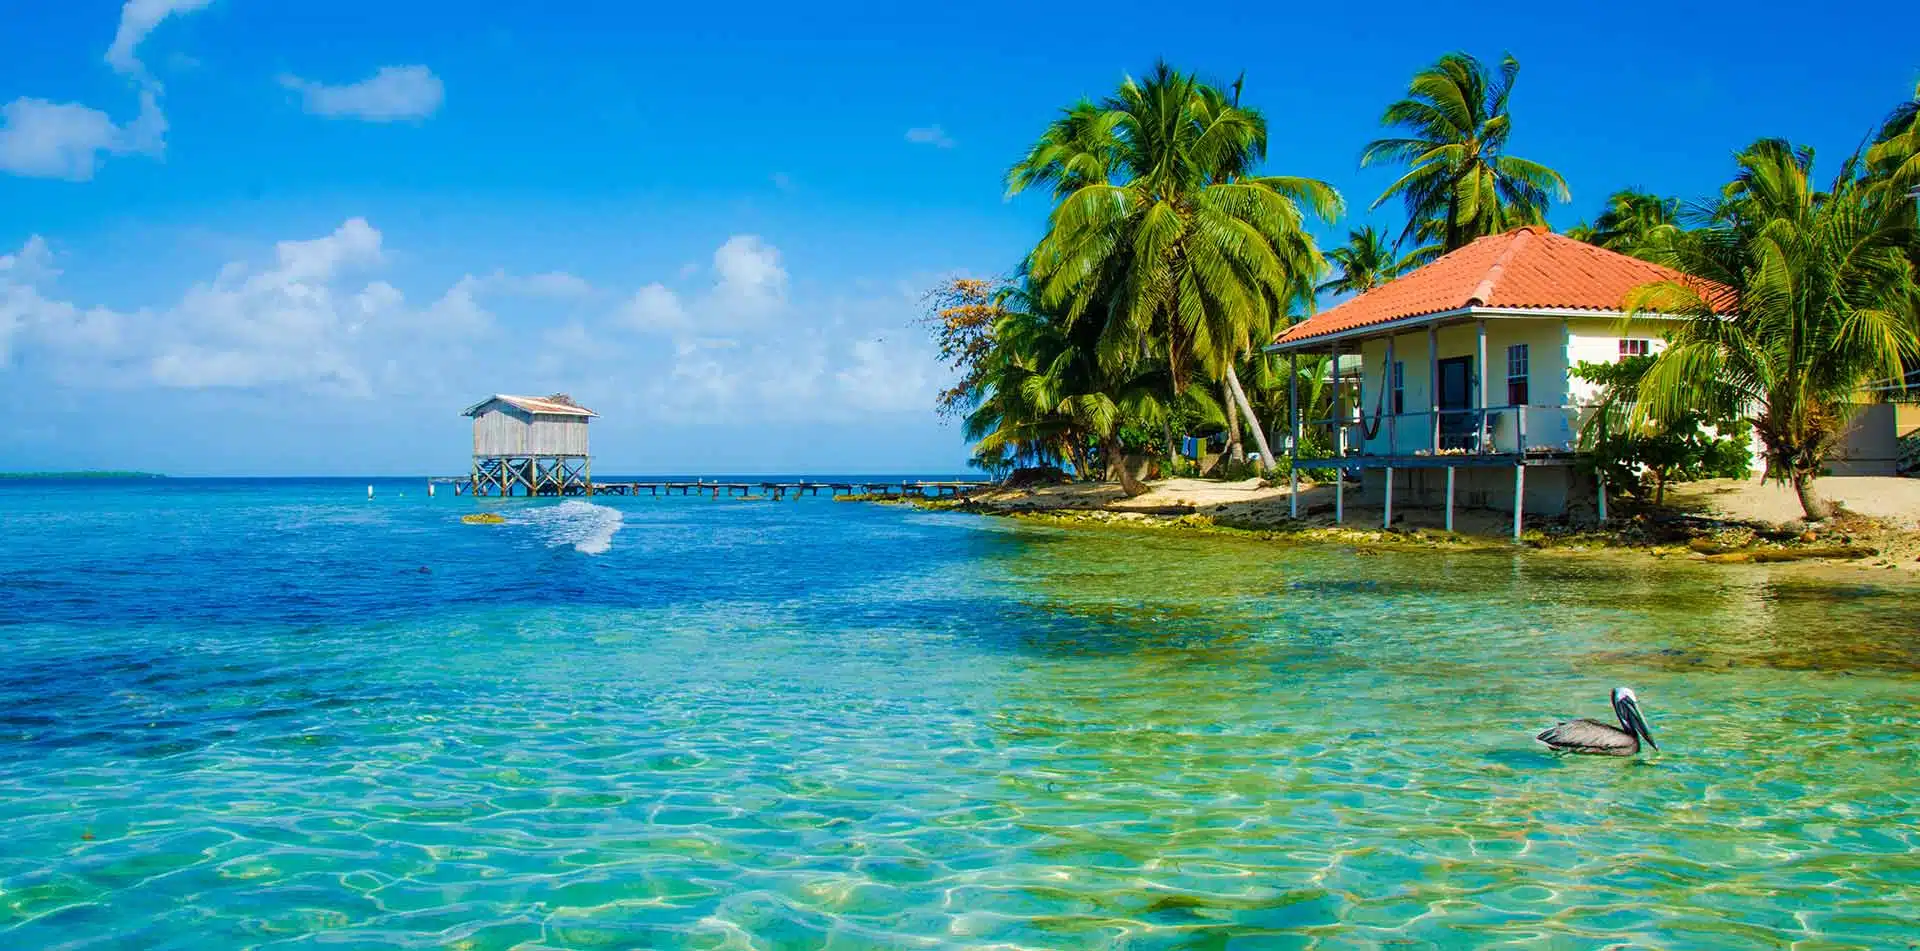 Central America Belize lush tropical island clear blue water beach bungalow scenic dock - luxury vacation destinations